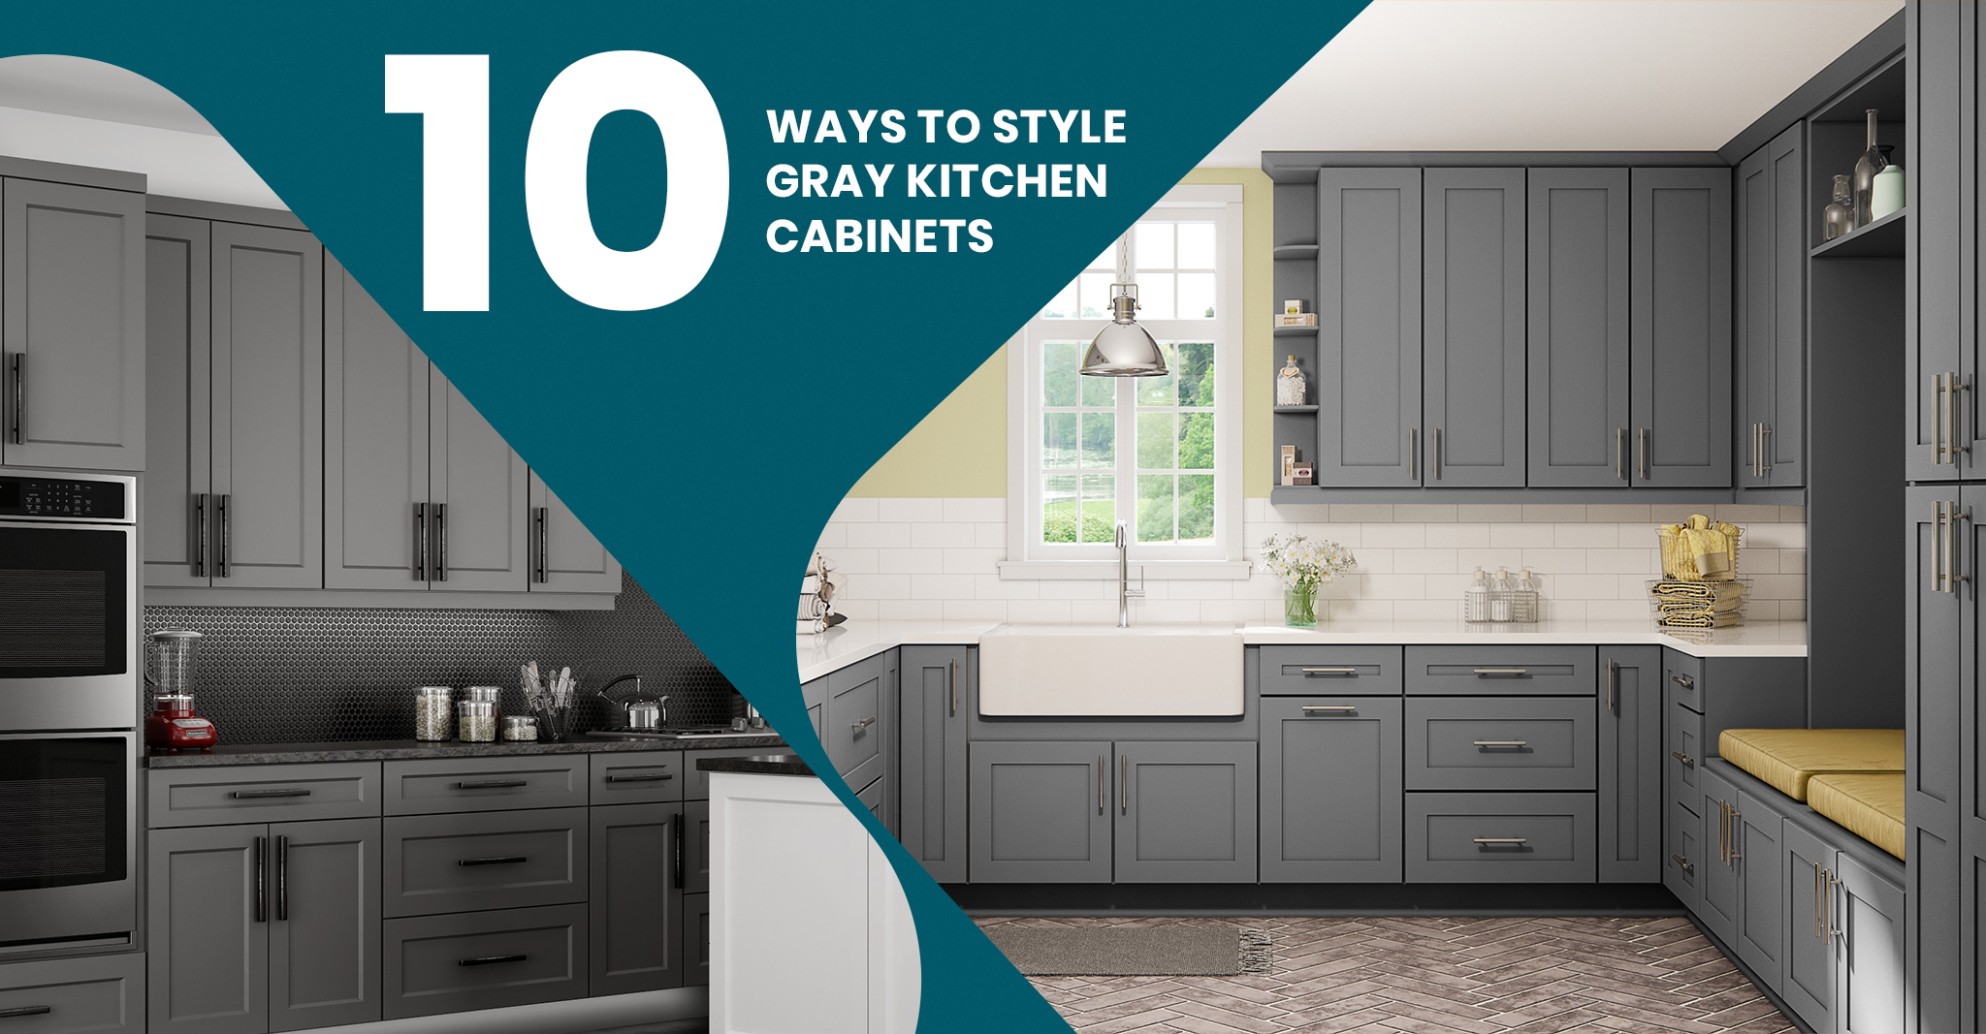 5 Ways to Style Gray Kitchen Cabinets (Design Ideas) - gray kitchen cabinets ideas